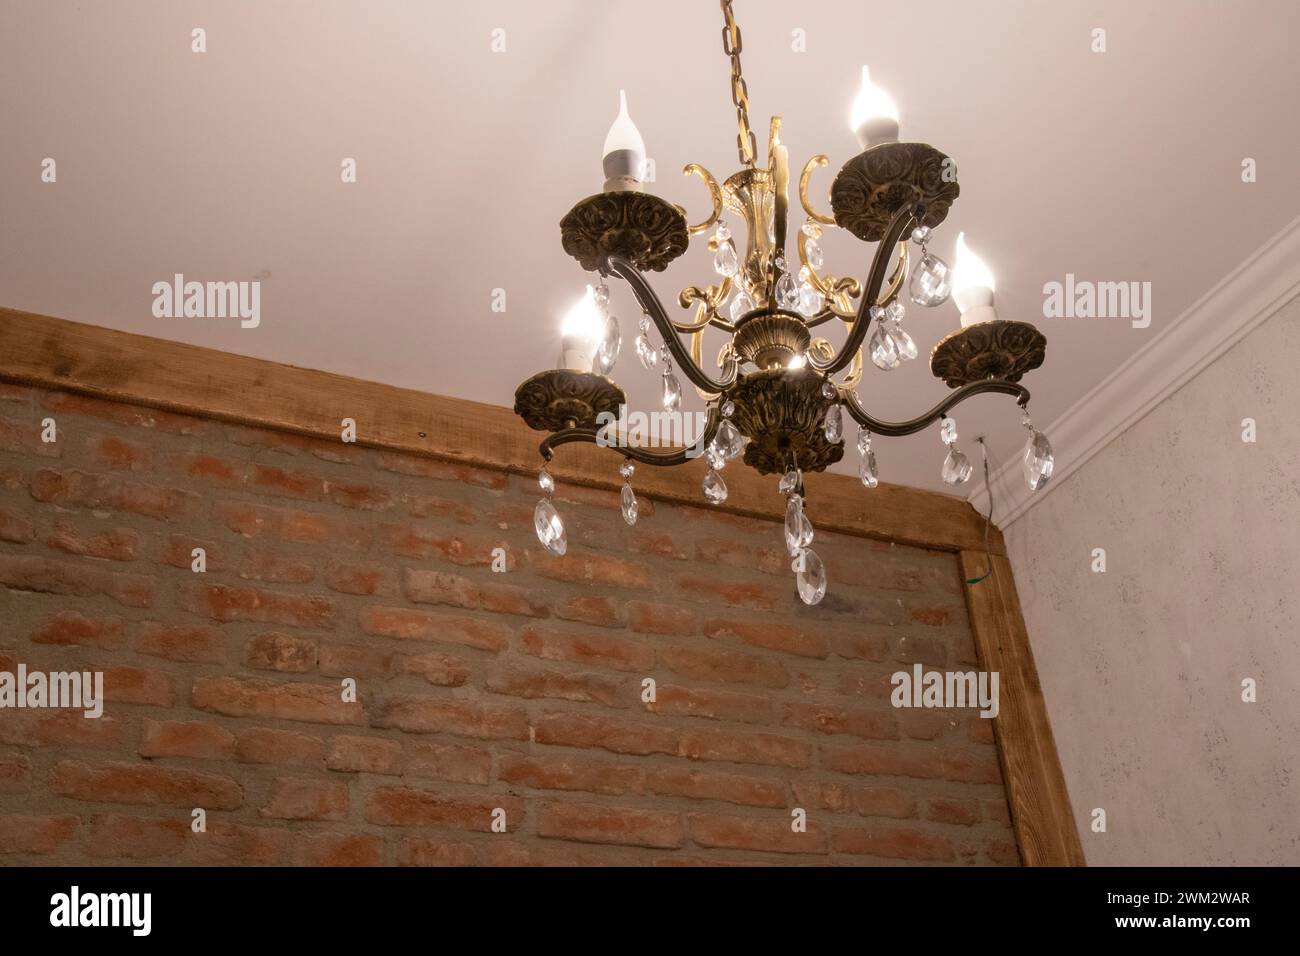 Antique chandelier against a vintage brick wall Stock Photo